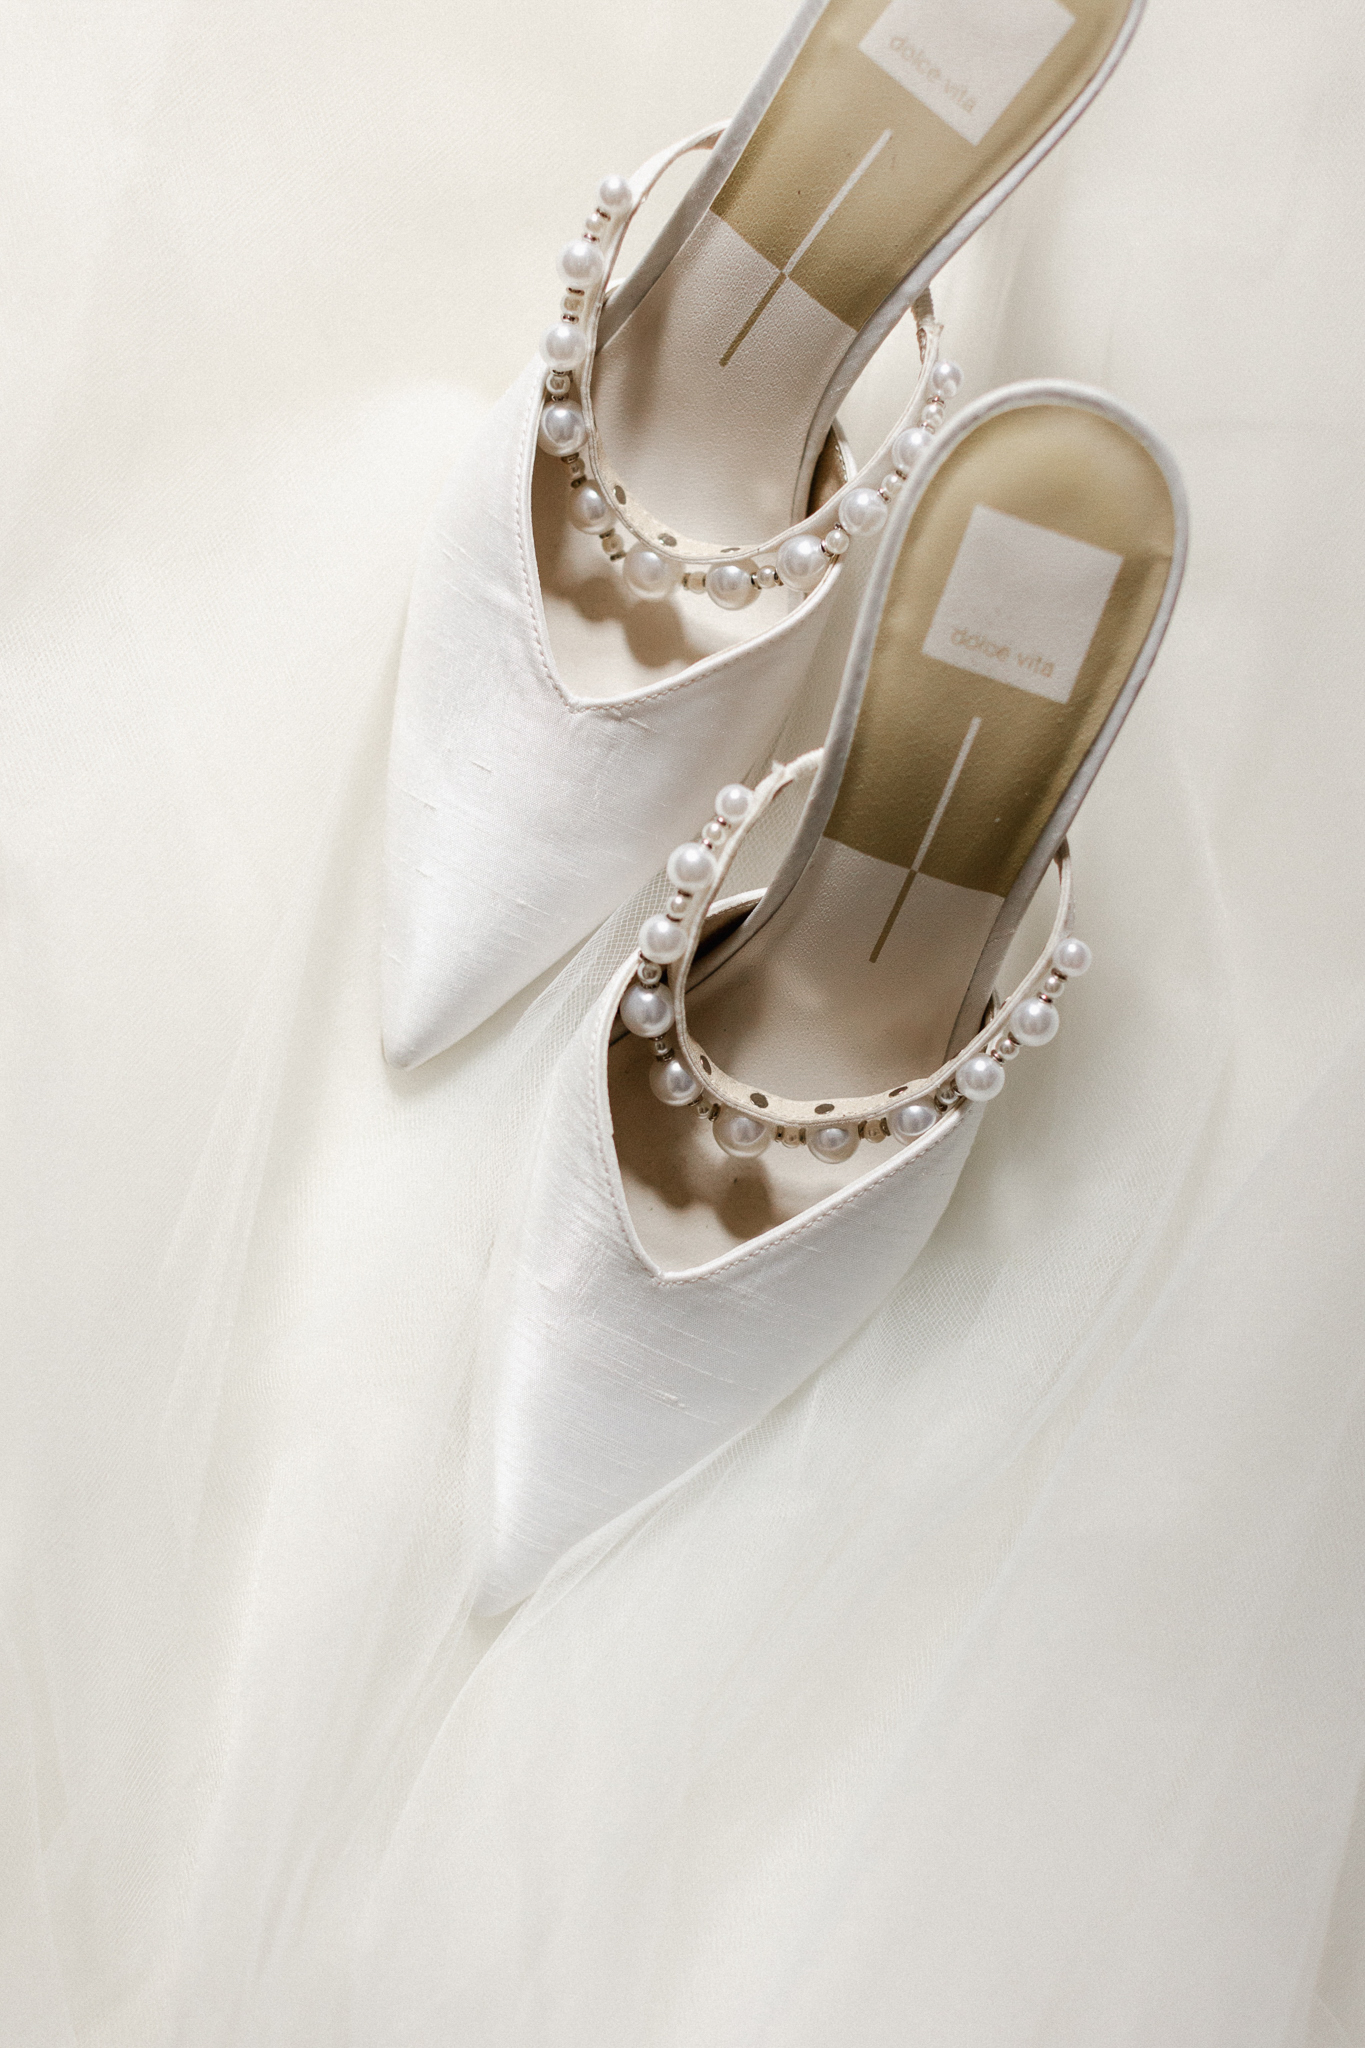 A pair of elegant white wedding shoes adorned with delicate pearls by Dolce Vita